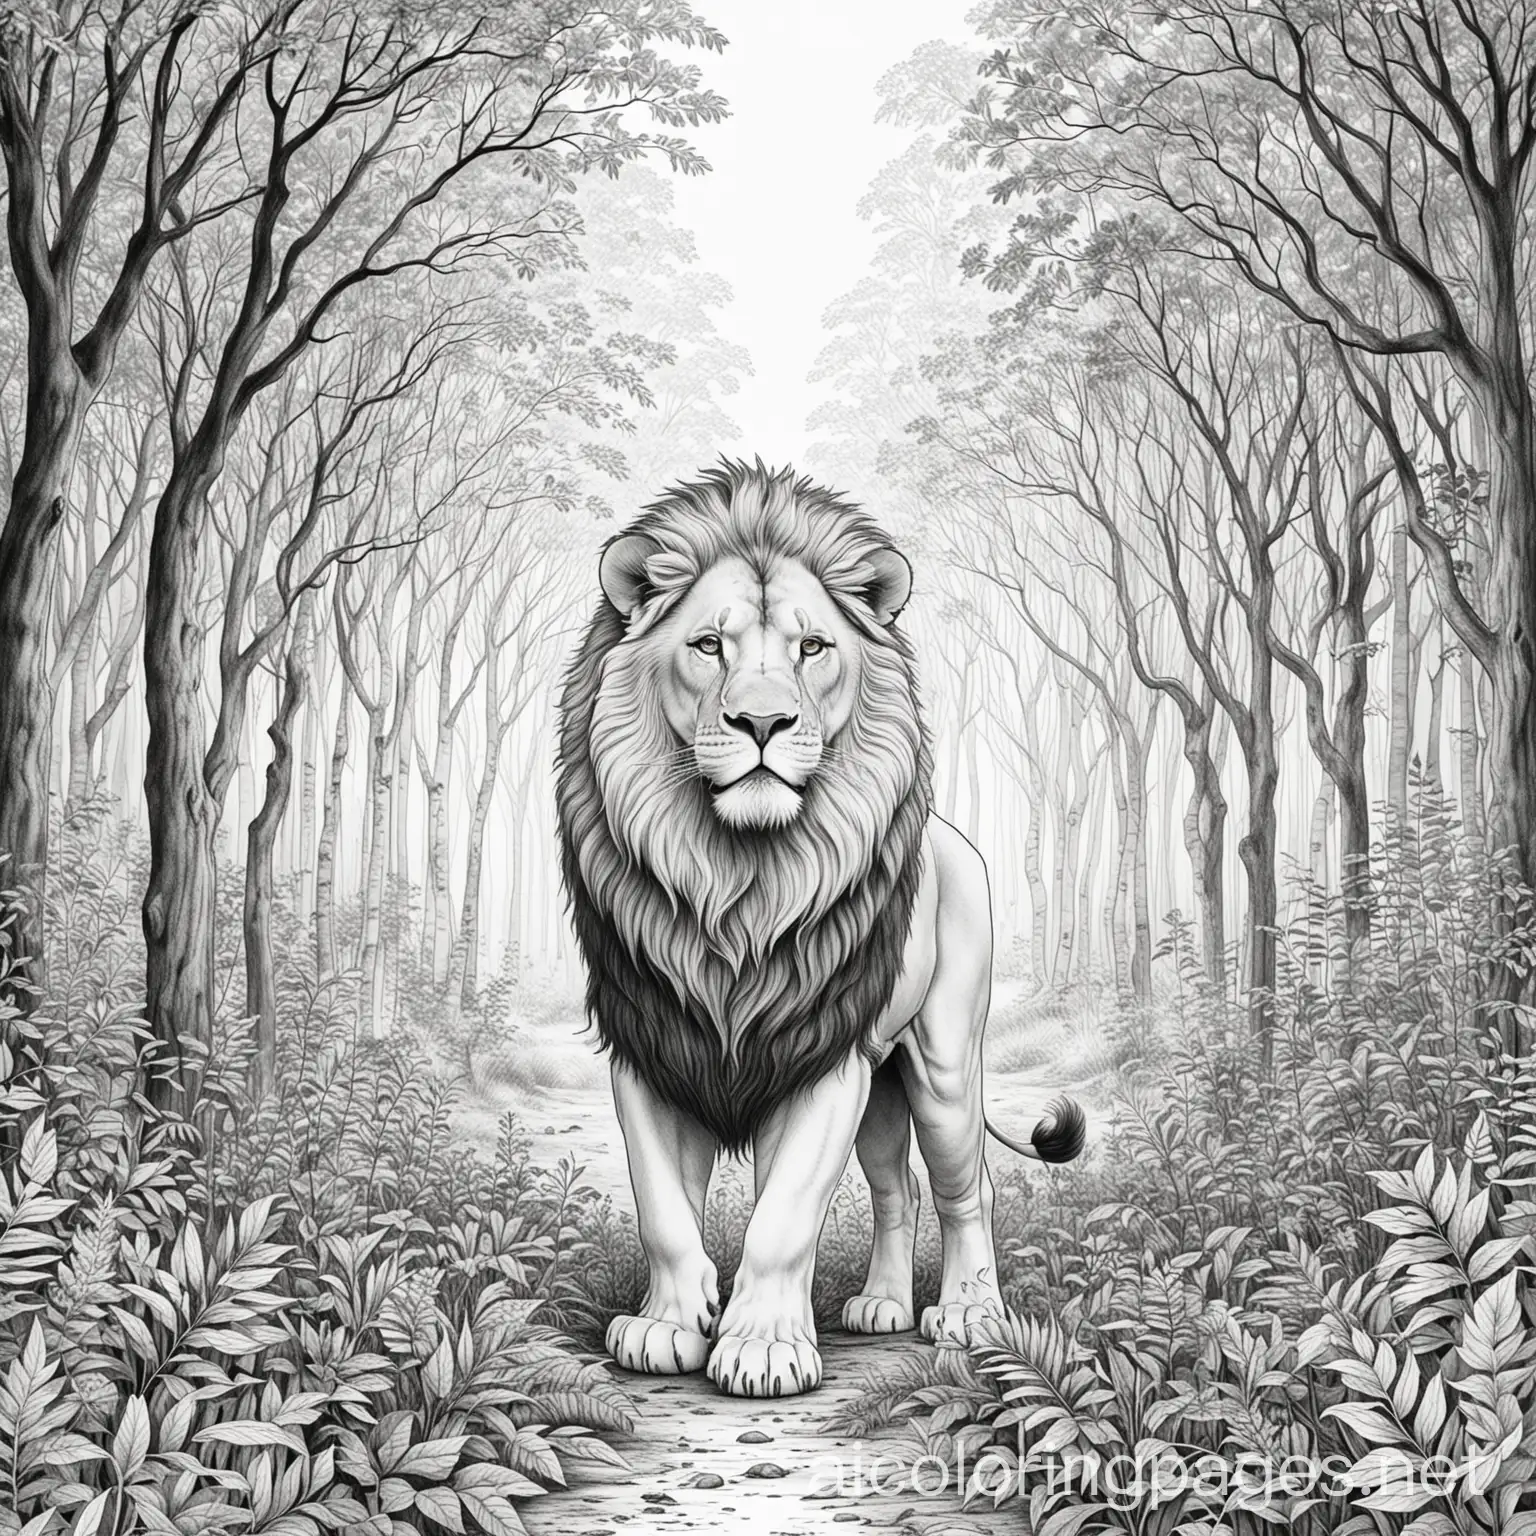 A THICK FOREST WITH A LION IN IT, Coloring Page, black and white, line art, white background, Simplicity, Ample White Space. The background of the coloring page is plain white to make it easy for young children to color within the lines. The outlines of all the subjects are easy to distinguish, making it simple for kids to color without too much difficulty